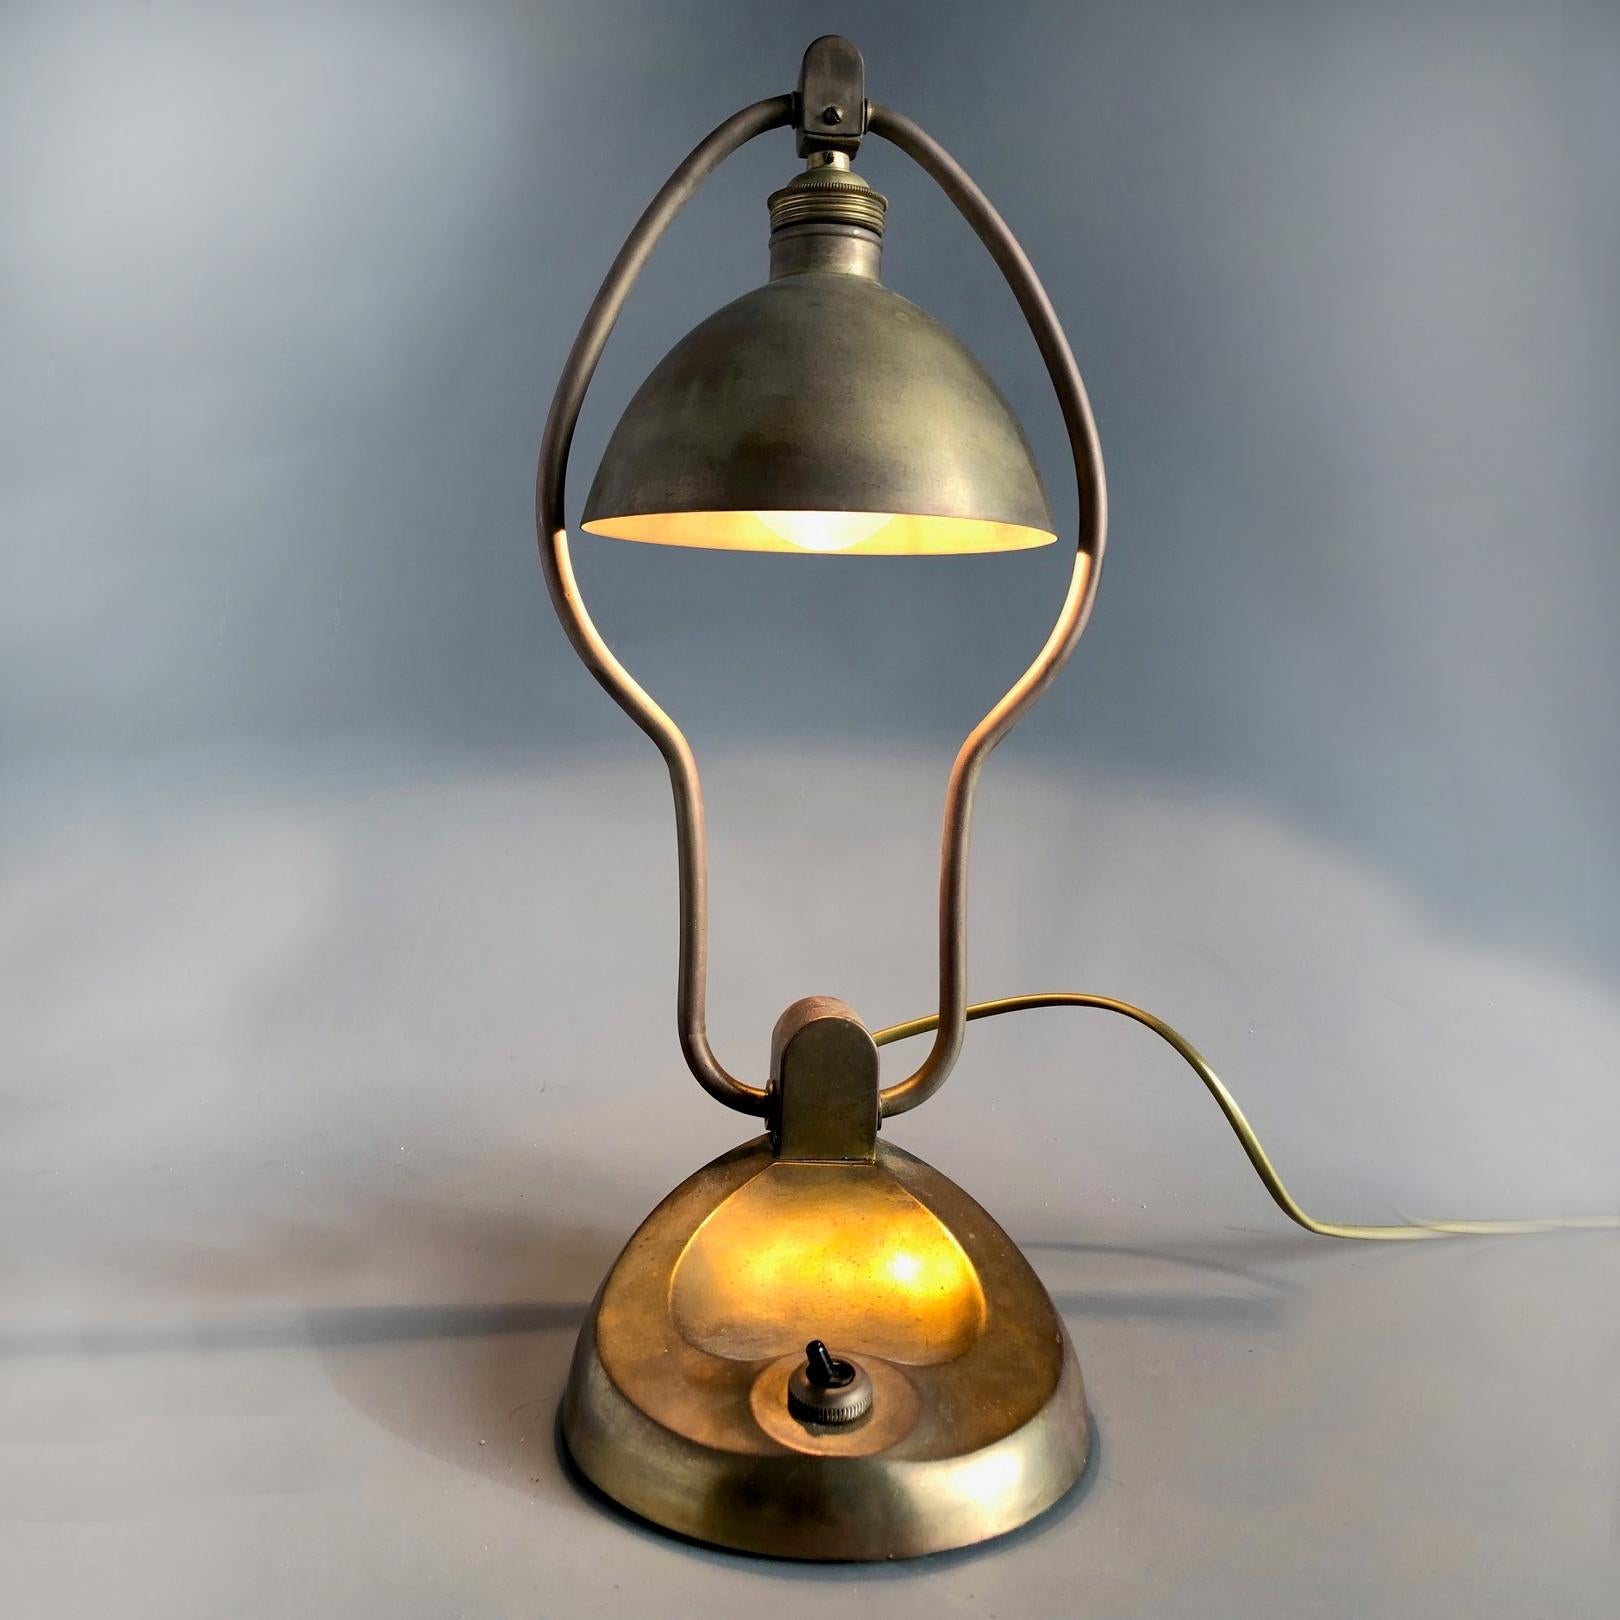 Austrian Vienna Secession Brass Table Lamp, 1900s For Sale